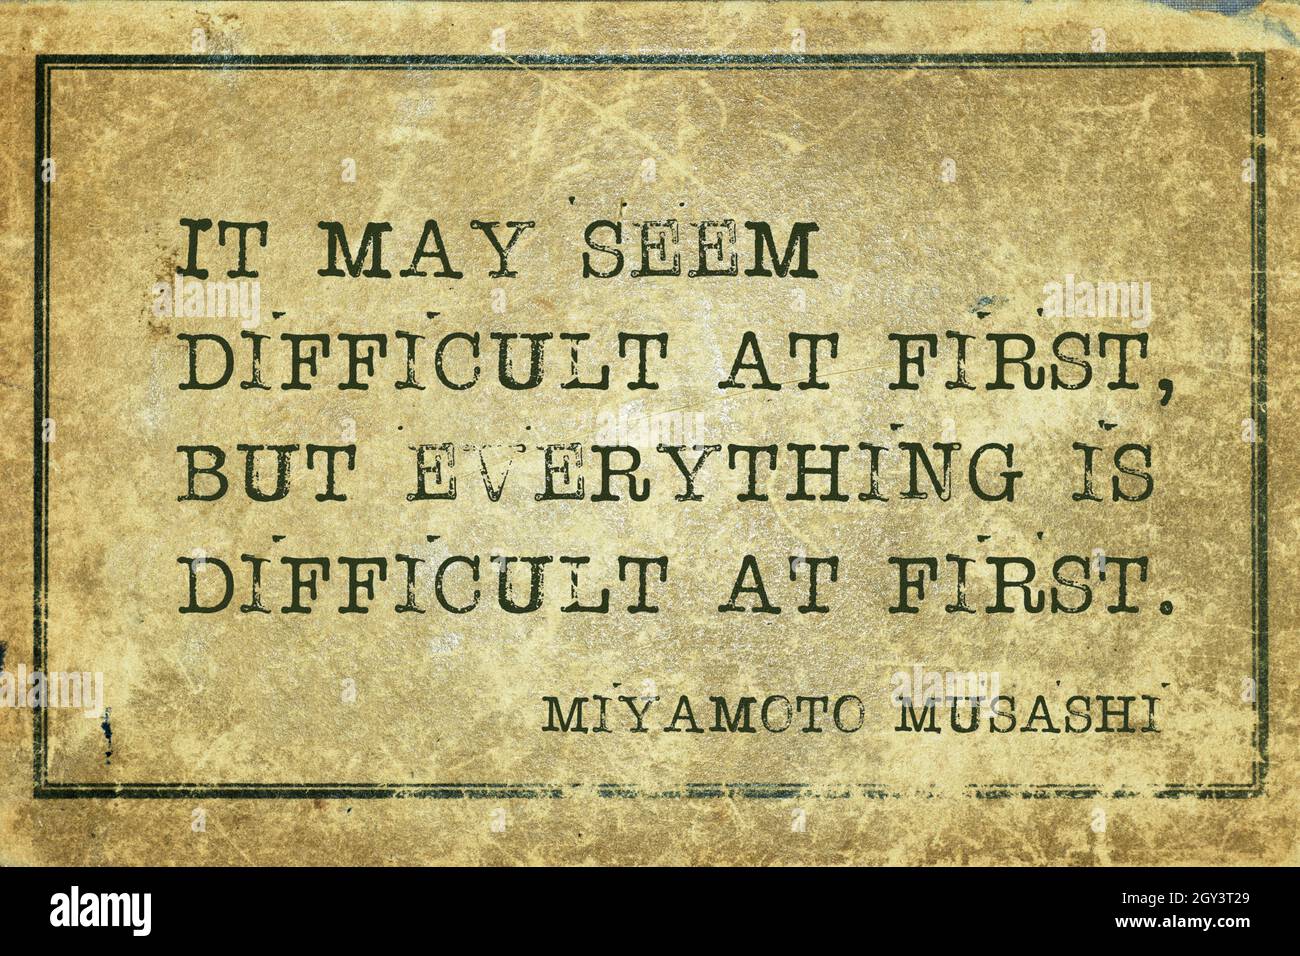 It may seem difficult at first, but everything is difficult at first - ancient Japanese swordsman and ronin Miyamoto Musashi quote printed on grunge v Stock Photo